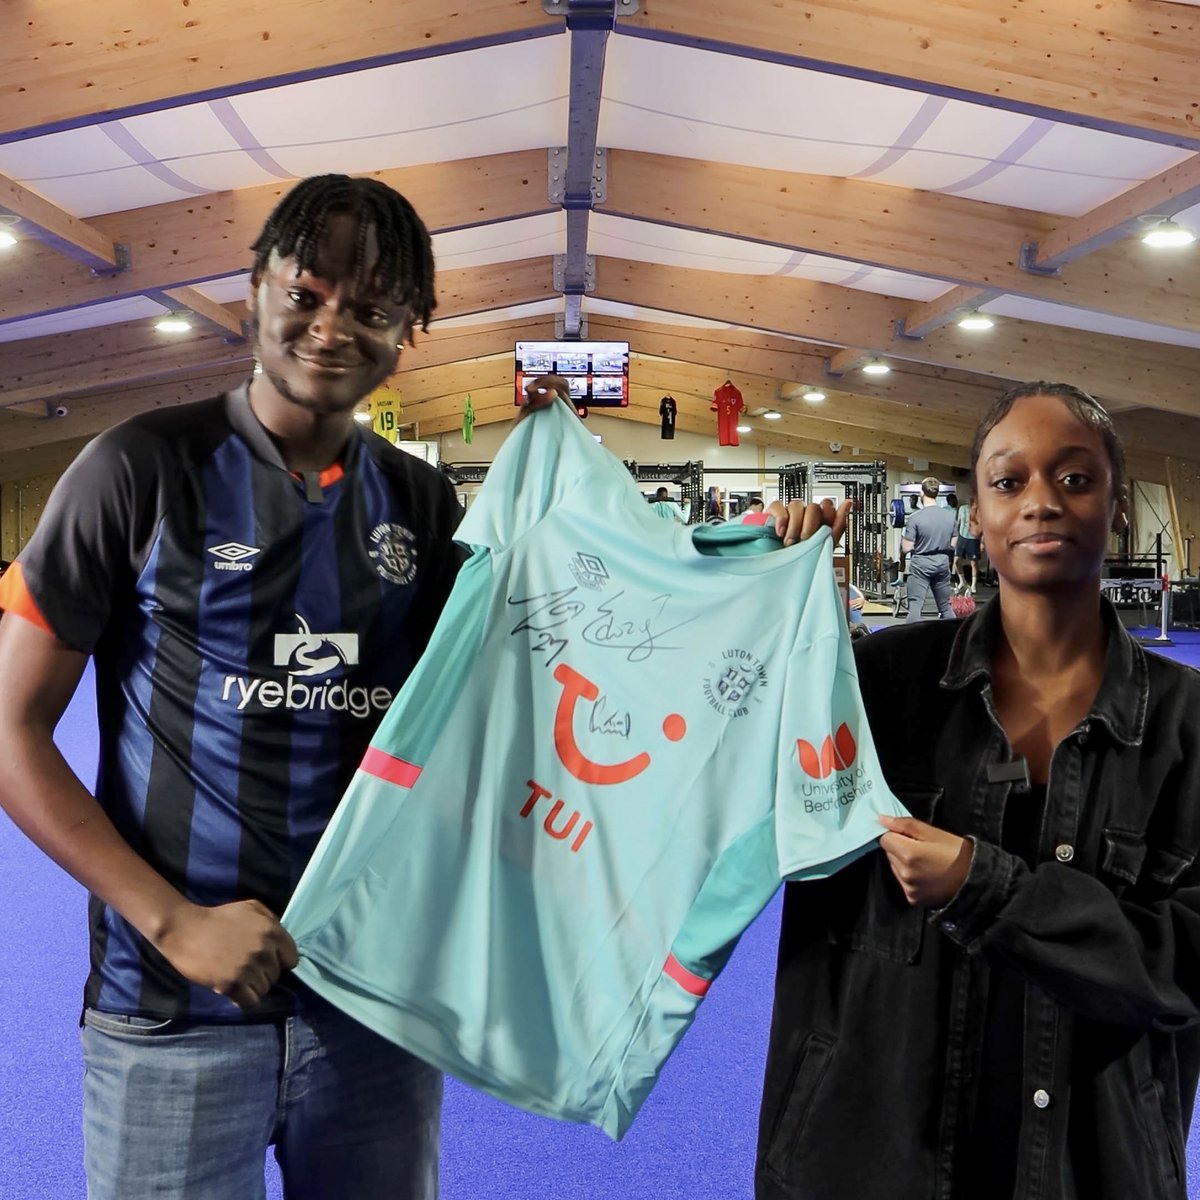 Want the chance to win this signed @LutonTown training shirt? 🤩👕 Head over to our Instagram to watch our latest video & see how you can take part in the giveaway: instagram.com/uniofbeds 👈 Good luck to the Hatters today against Man City! 🙌⚽#PremierLeague #LutonTown #MCILUT